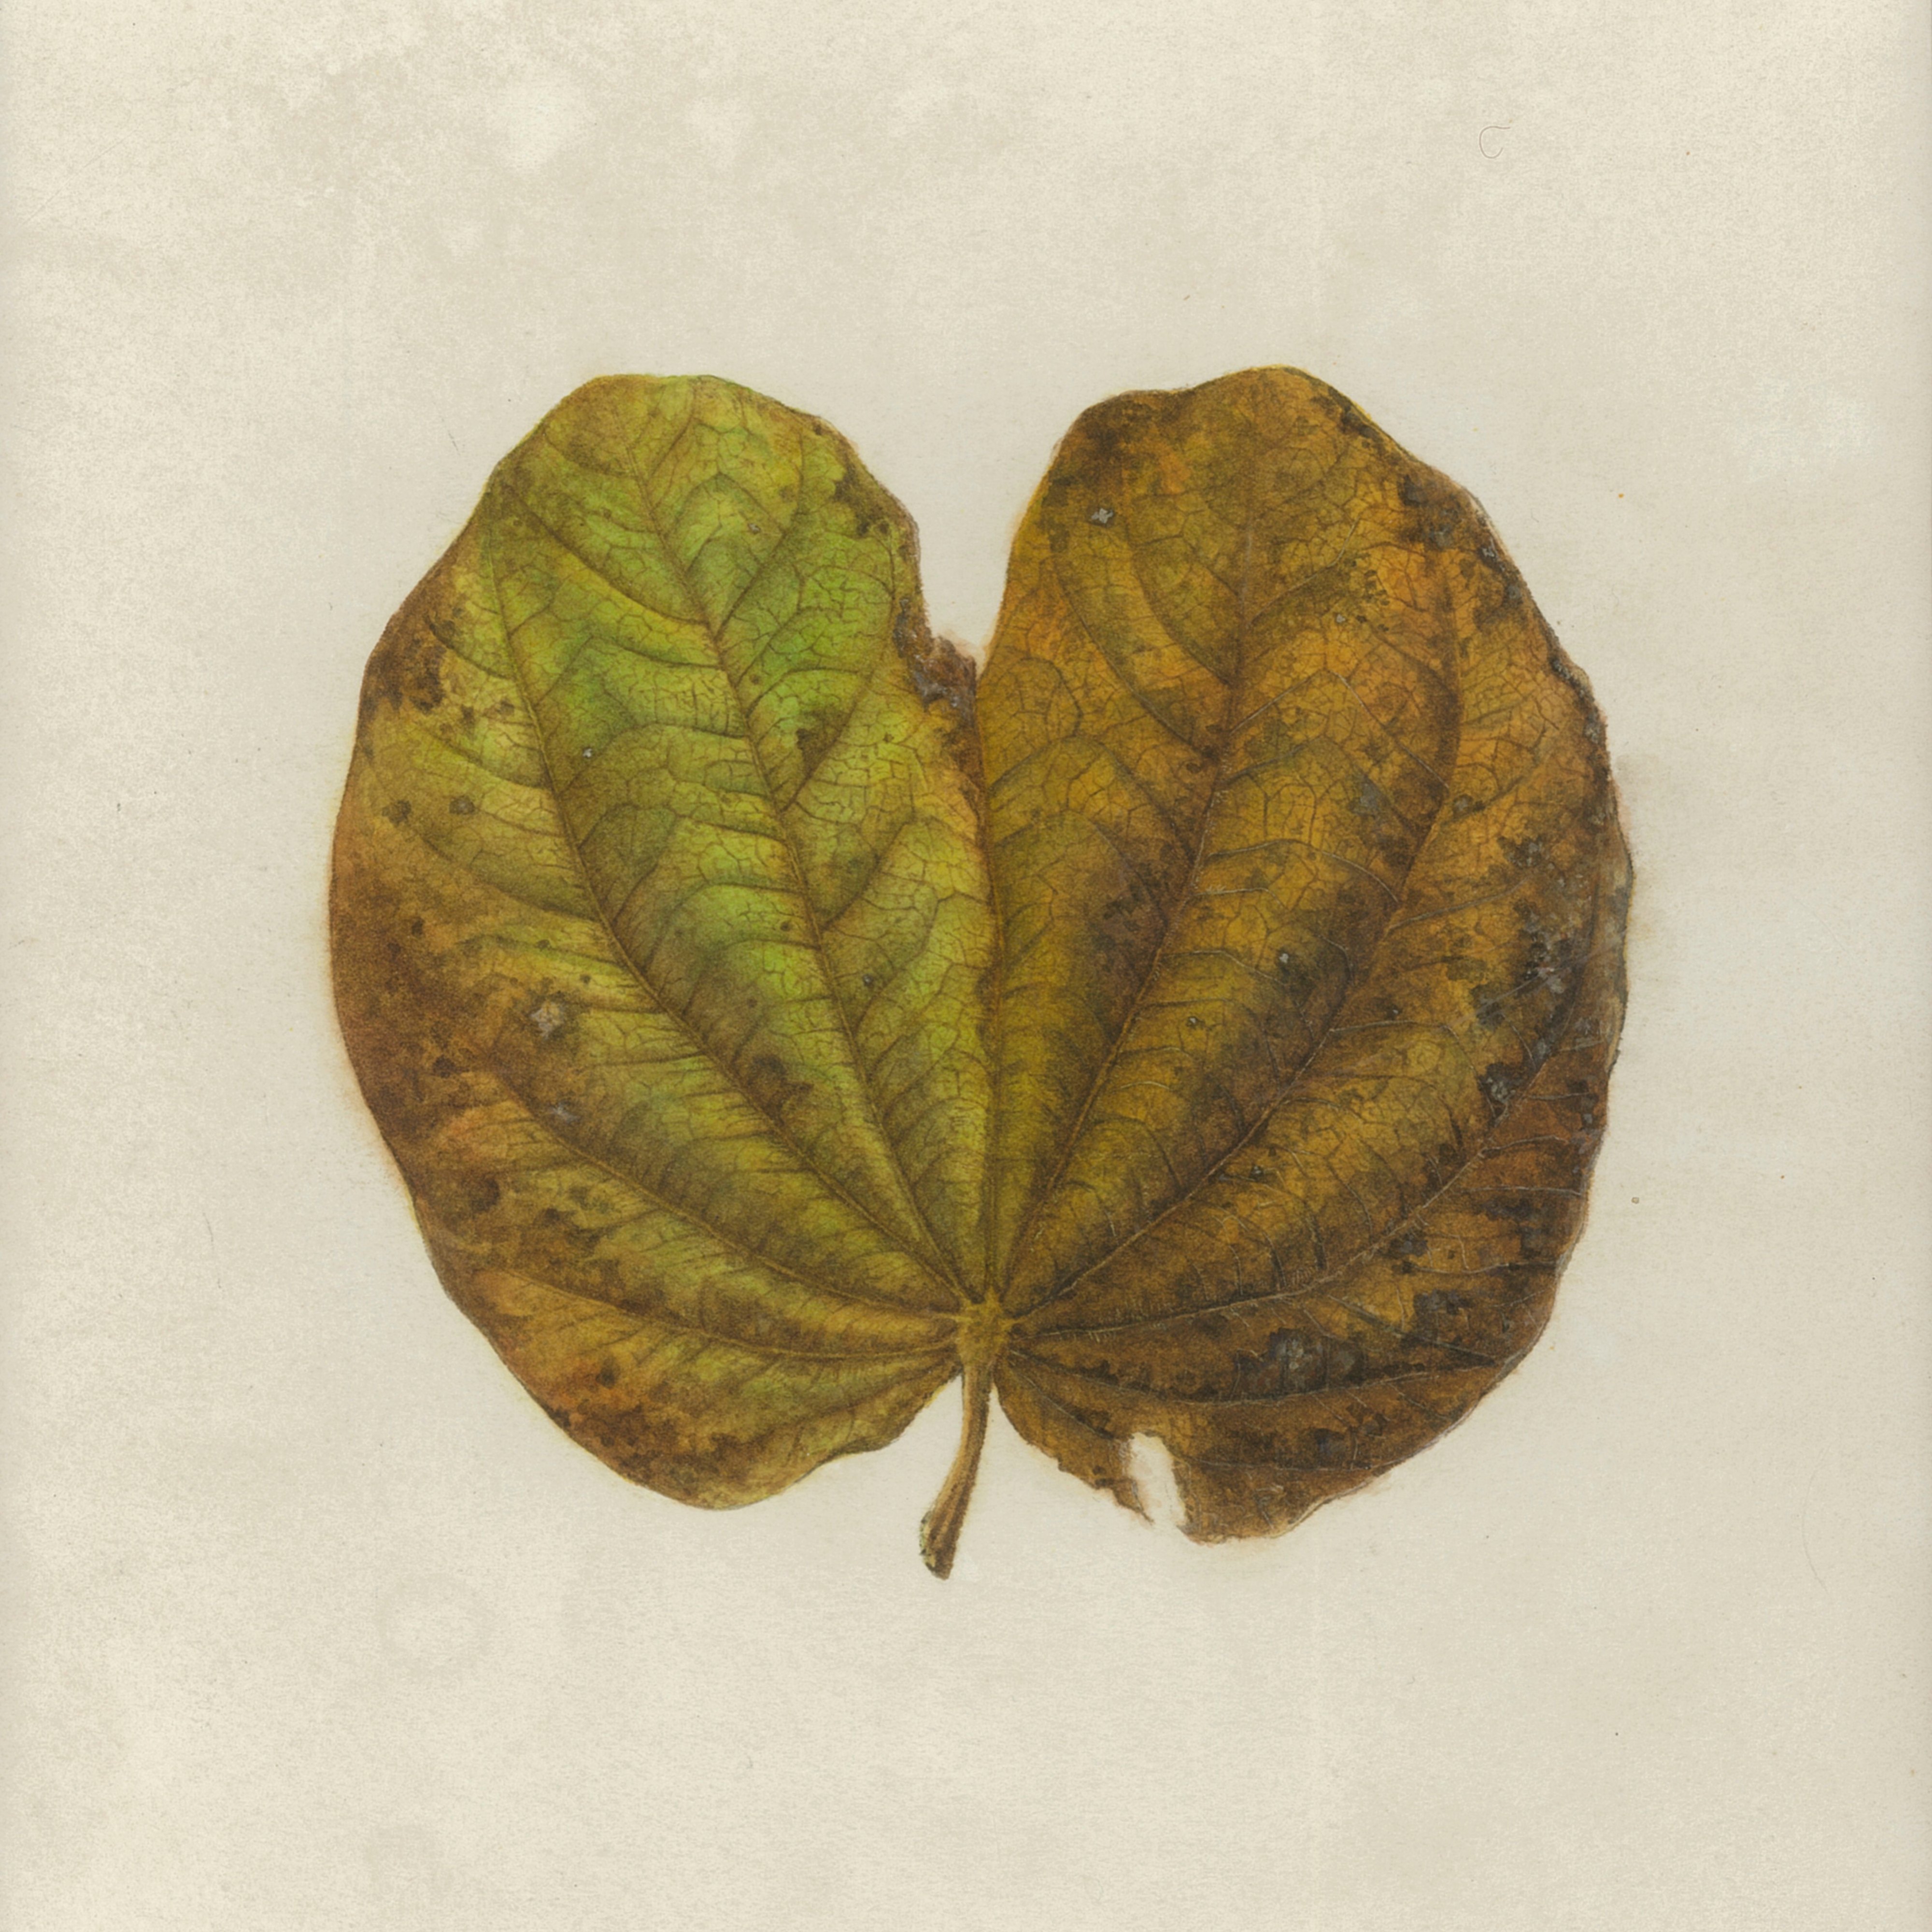 watercolour painting of a partially brown Bauhinia variegata leaf, showing two lobes and fine details of the veins and discolouration